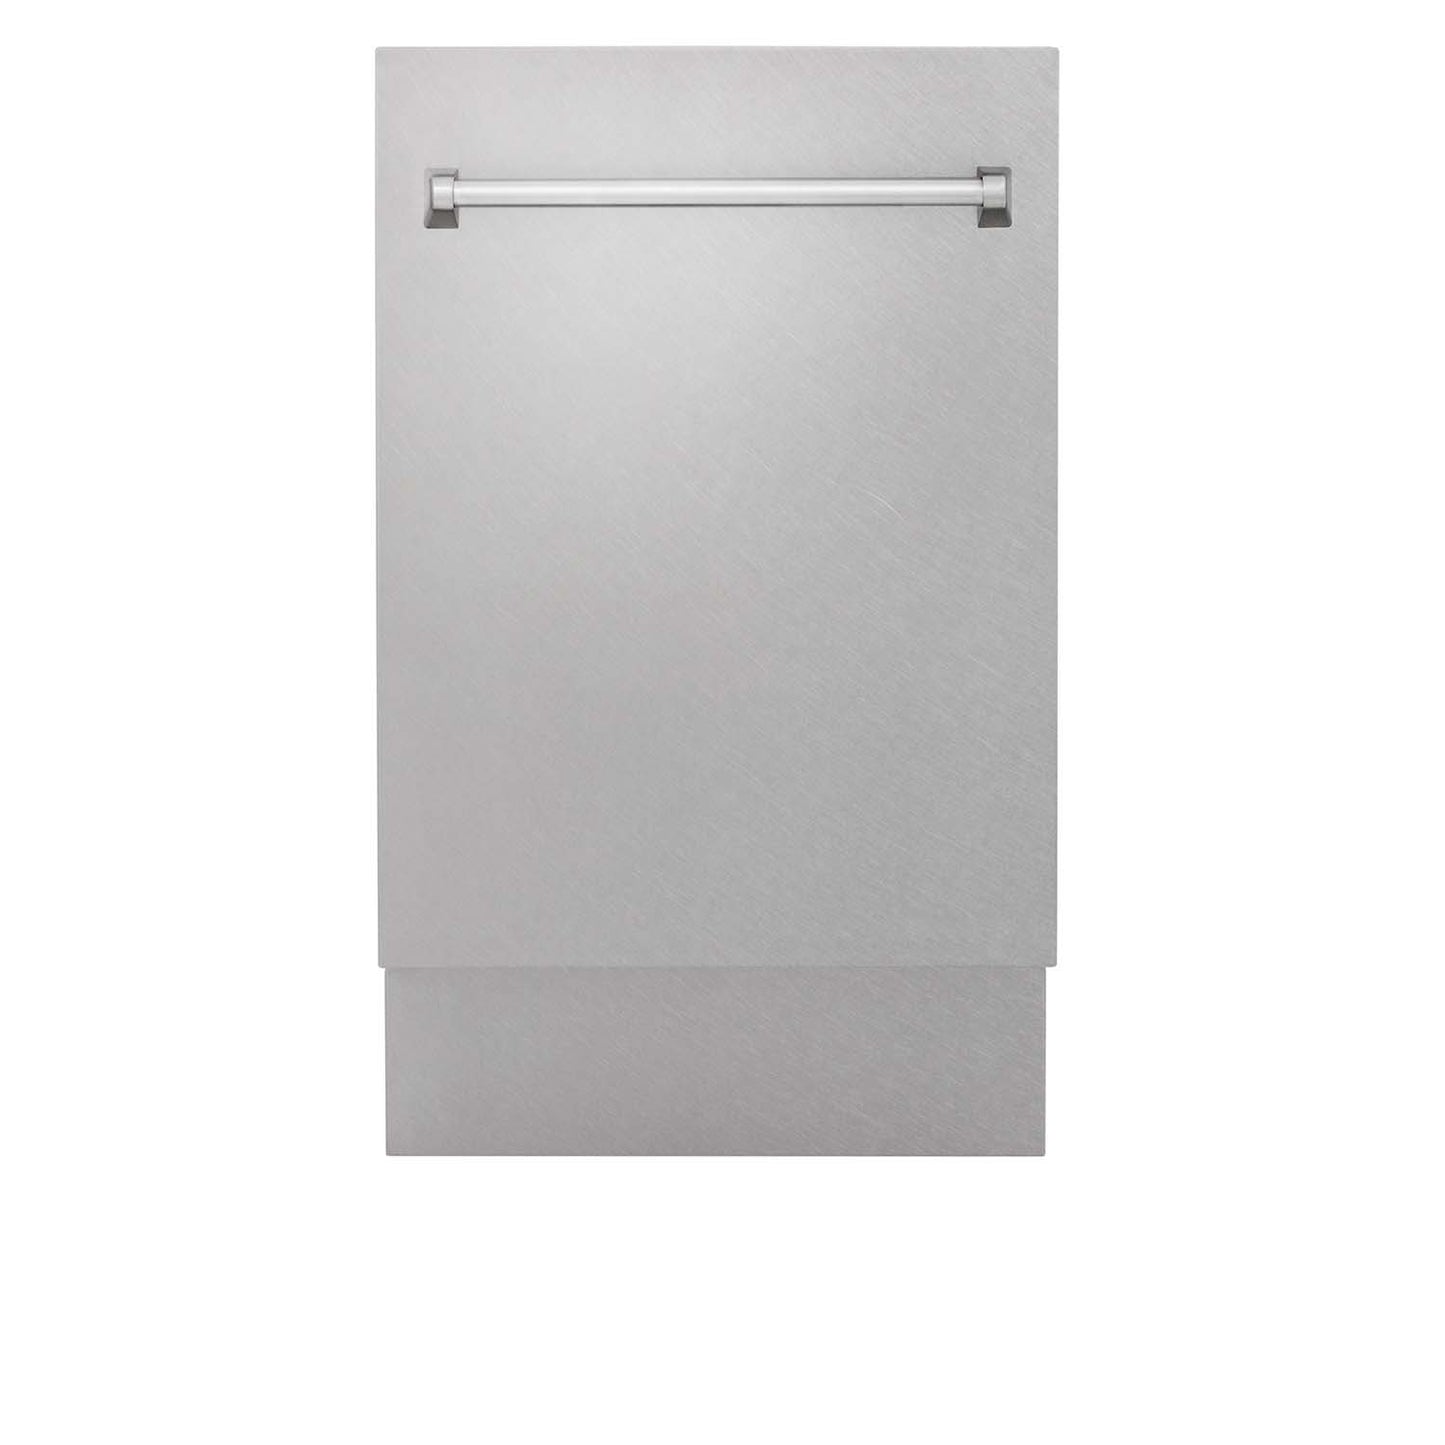 ZLINE 18 in. Tallac Series 3rd Rack Top Control Dishwasher in a Stainless Steel Tub with Fingerprint Resistant Stainless Steel Panel, 51dBa (DWV-SN-18)